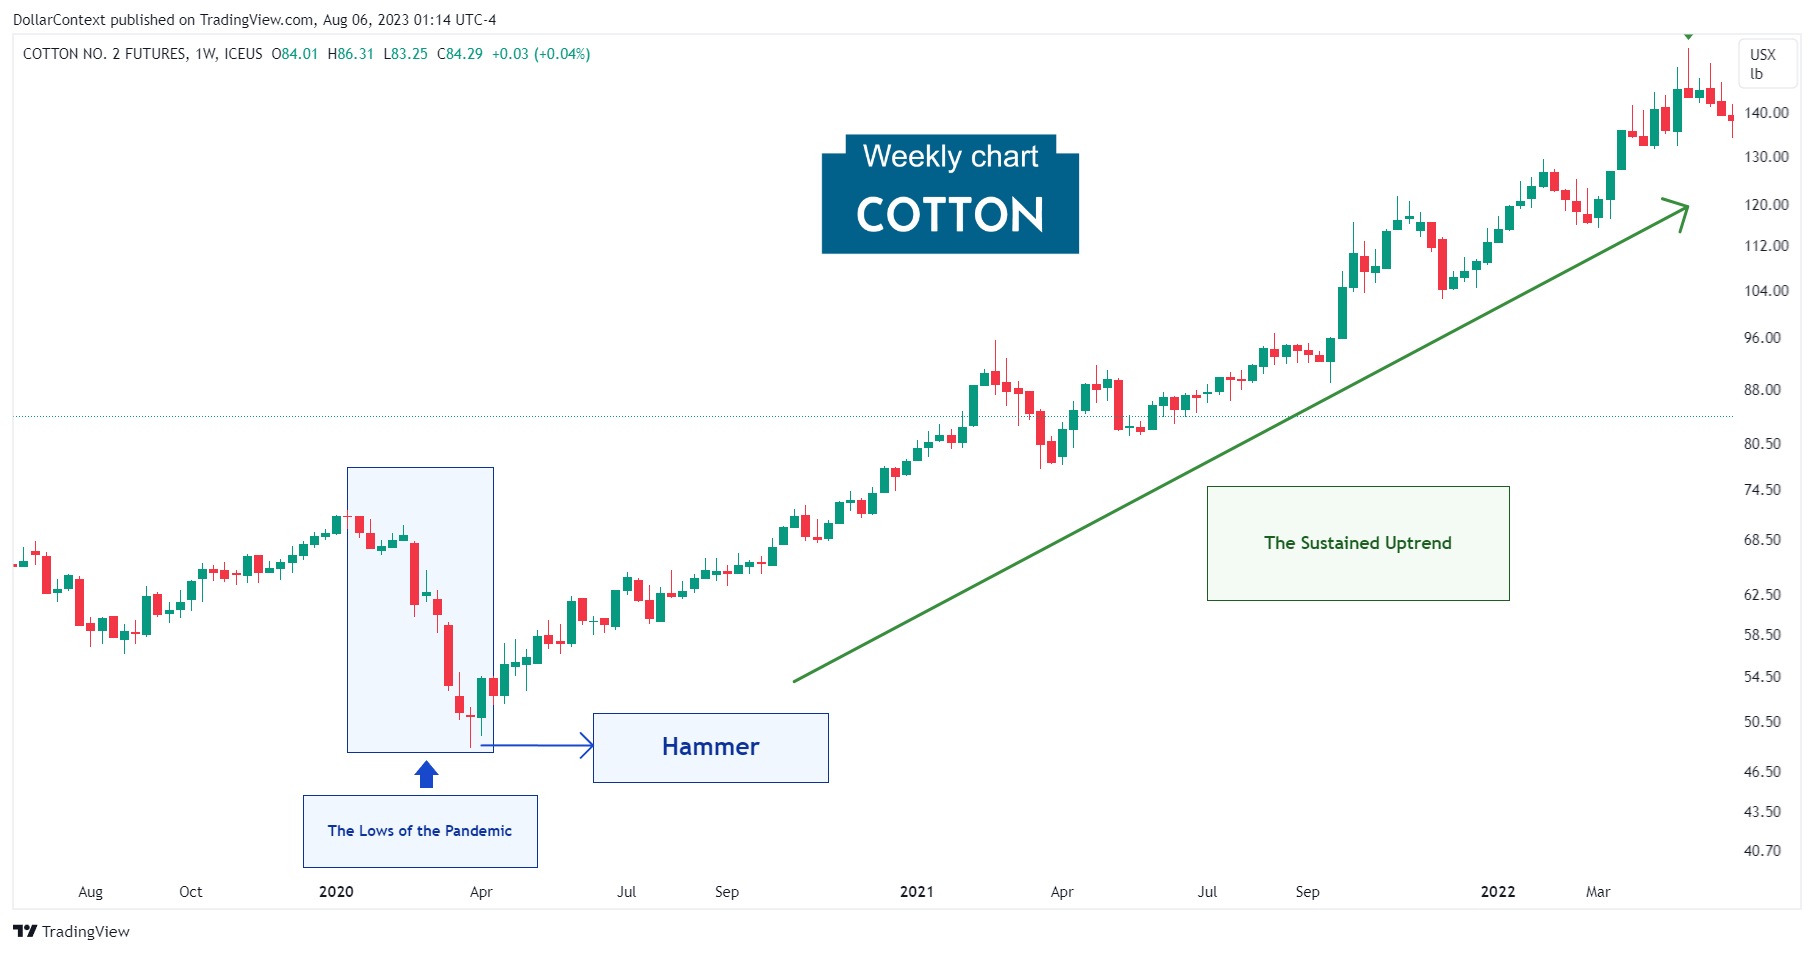 Cotton Futures: Hammer. March 2020 (Weekly Chart)